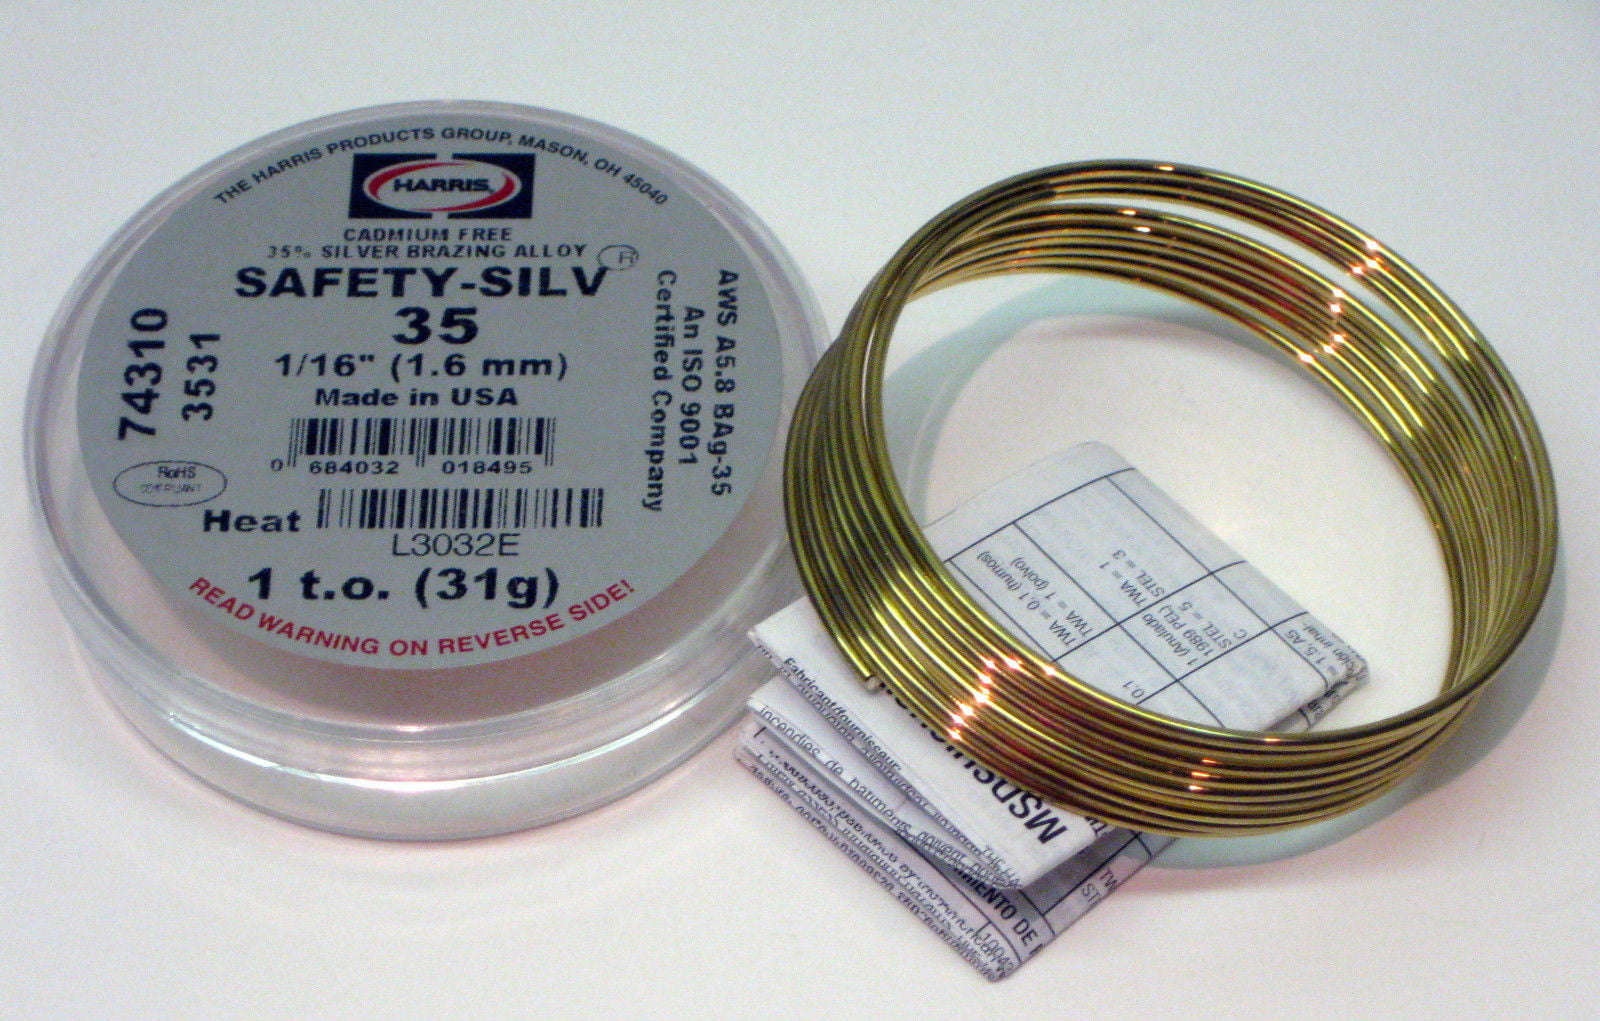 1 per Pack Harris Safety-Silv 45 Silver Brazing Alloy Wire 